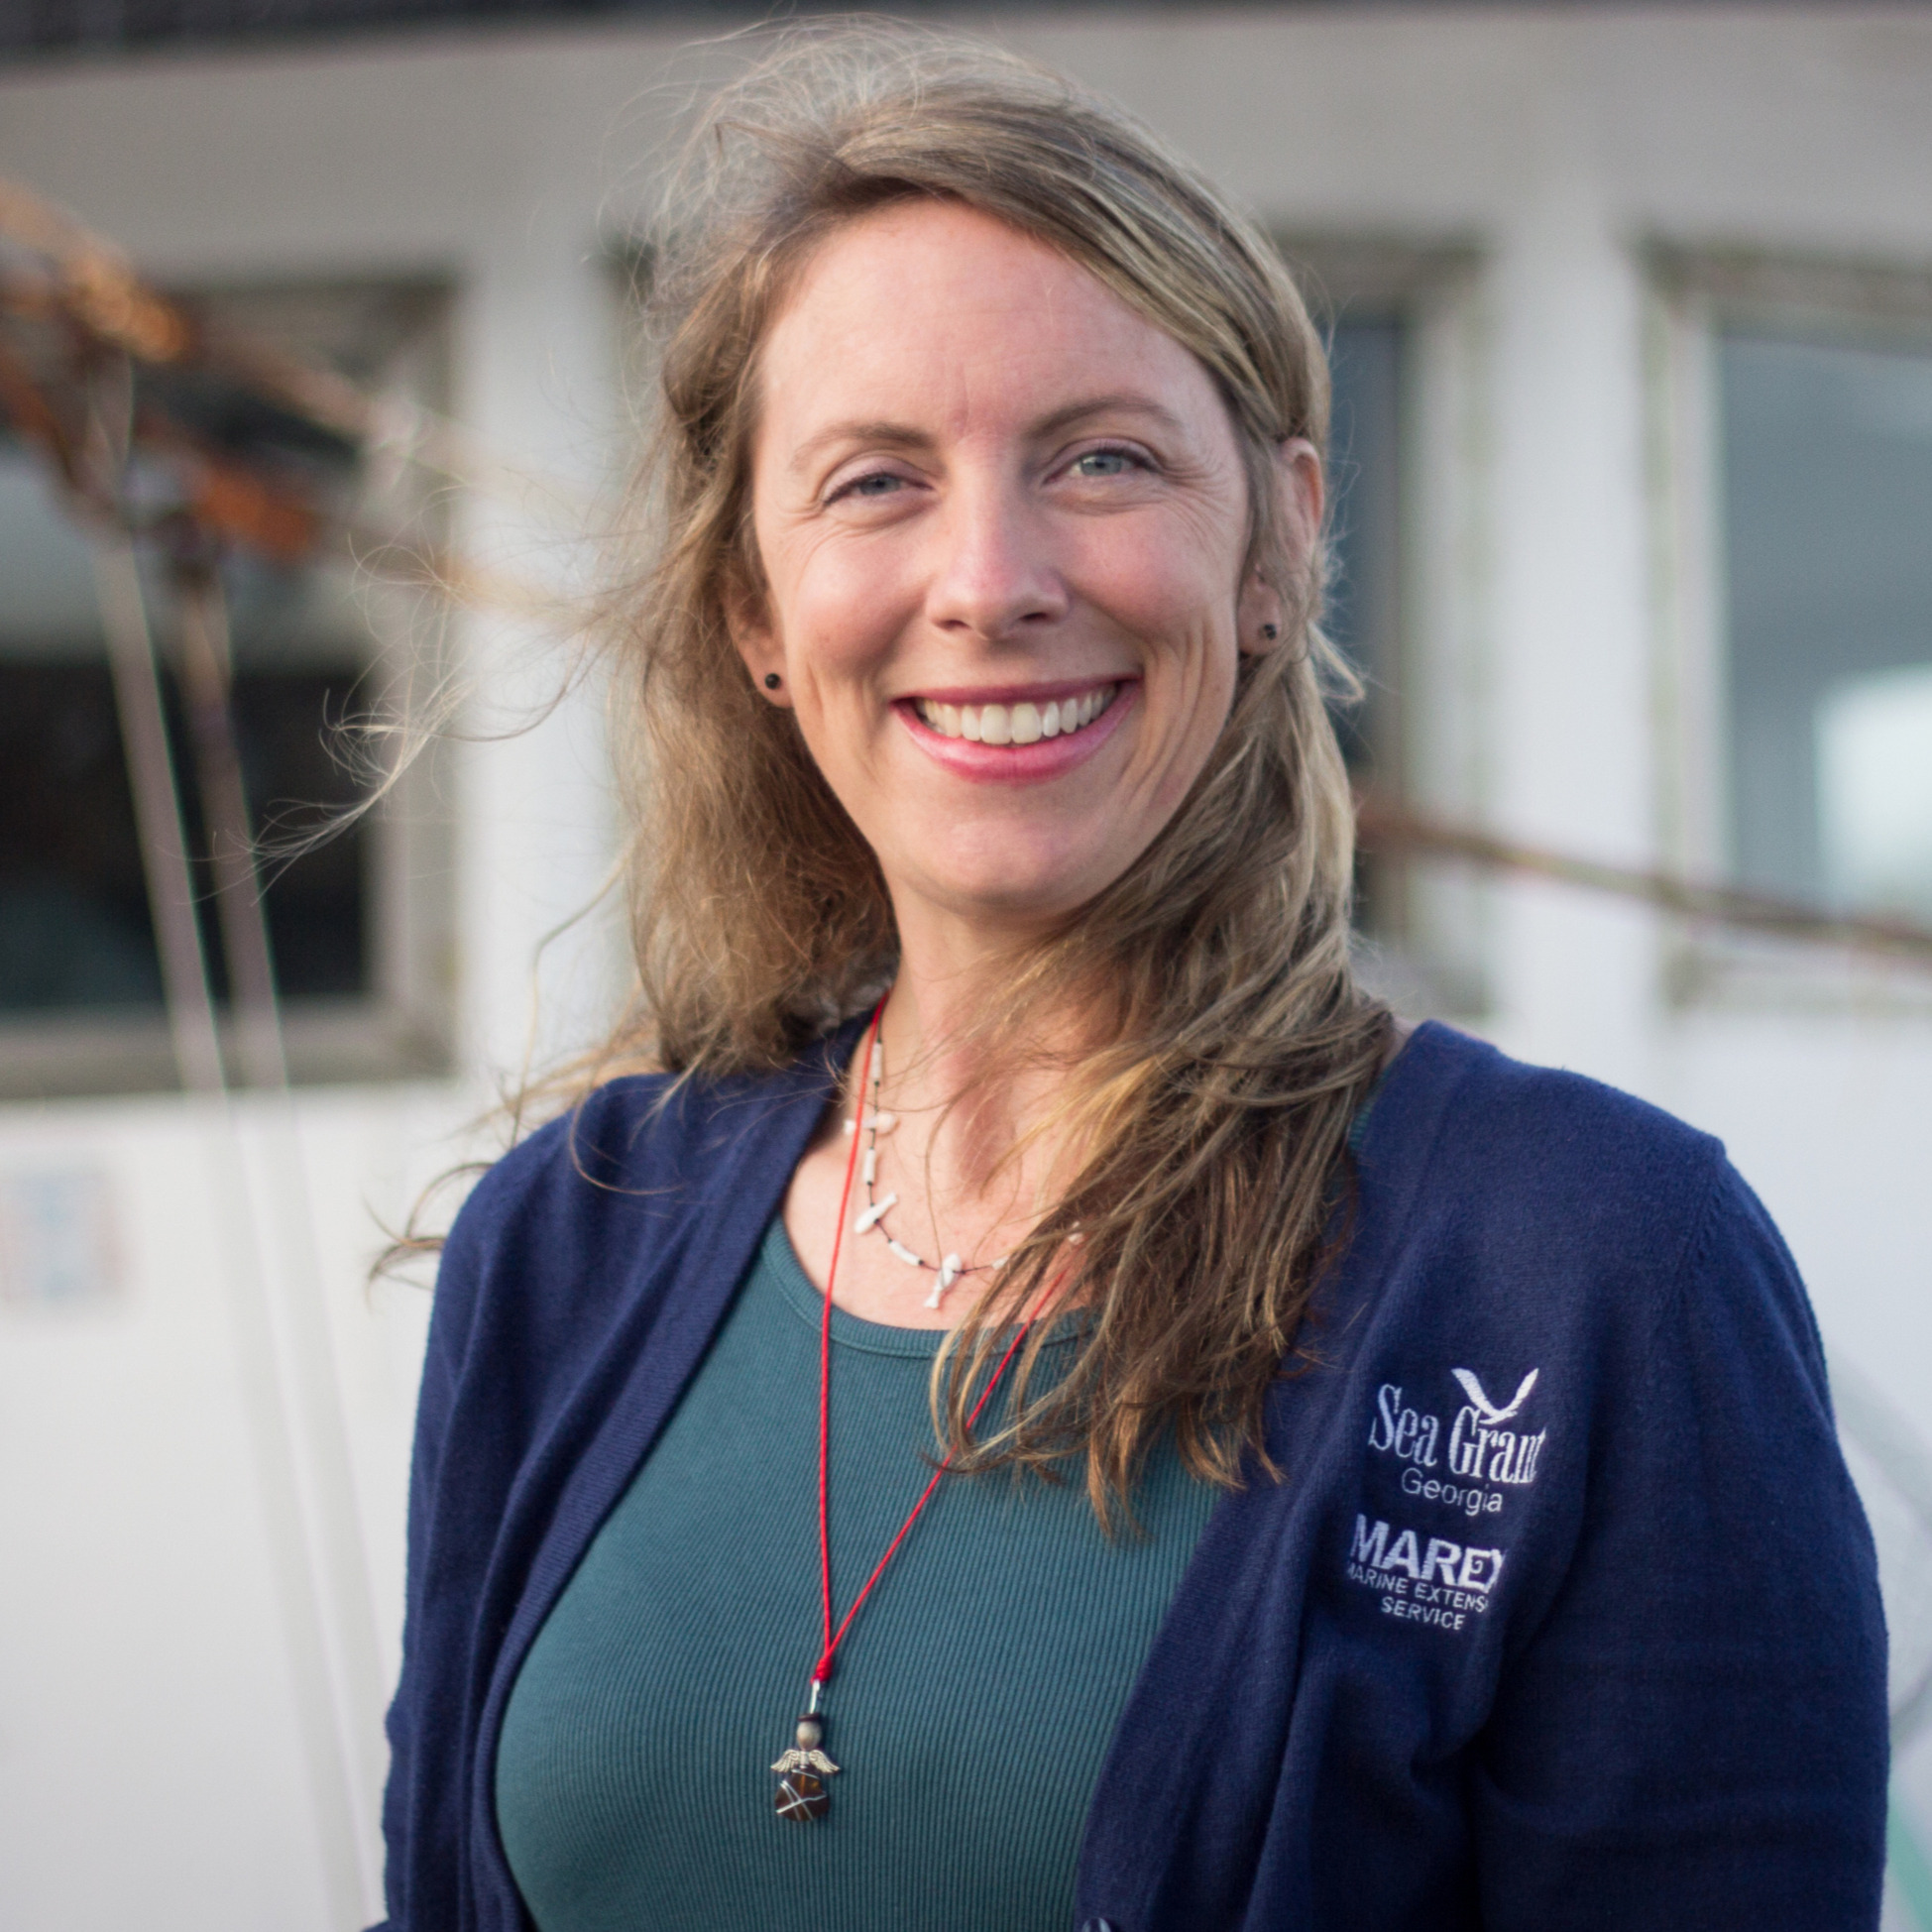 Working with Tybee Island communities to build resilience: new interview with IRIS researcher Jill Gambill